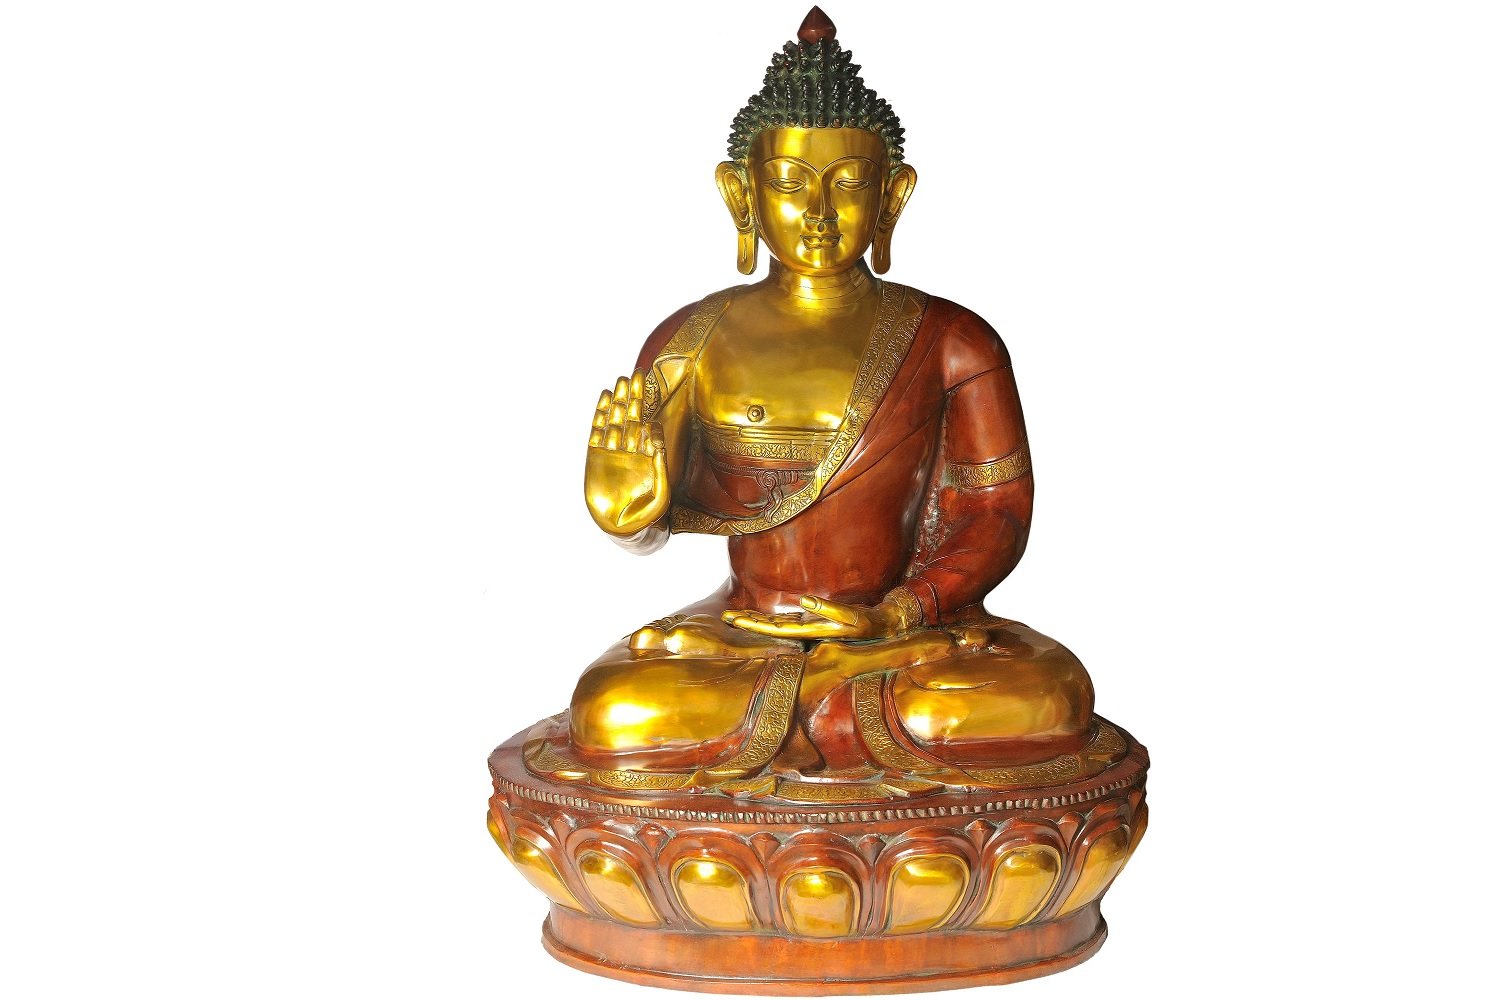 art - What is the reason for attributing Lord Buddha's statues to days the  of week? - Buddhism Stack Exchange